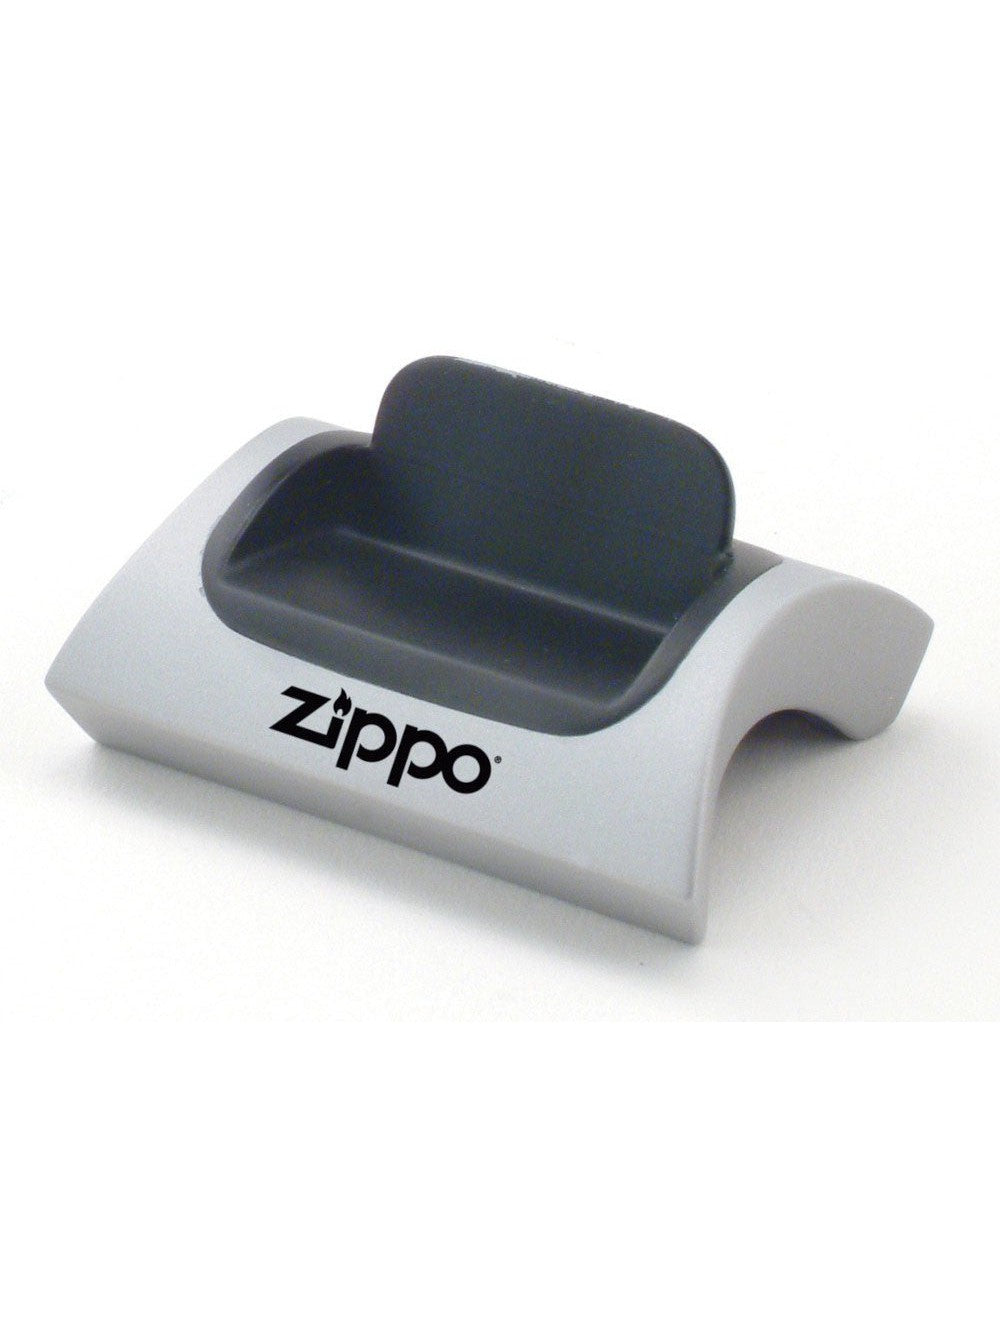 Zippo Magnetic Lighter Display Stand - 142226